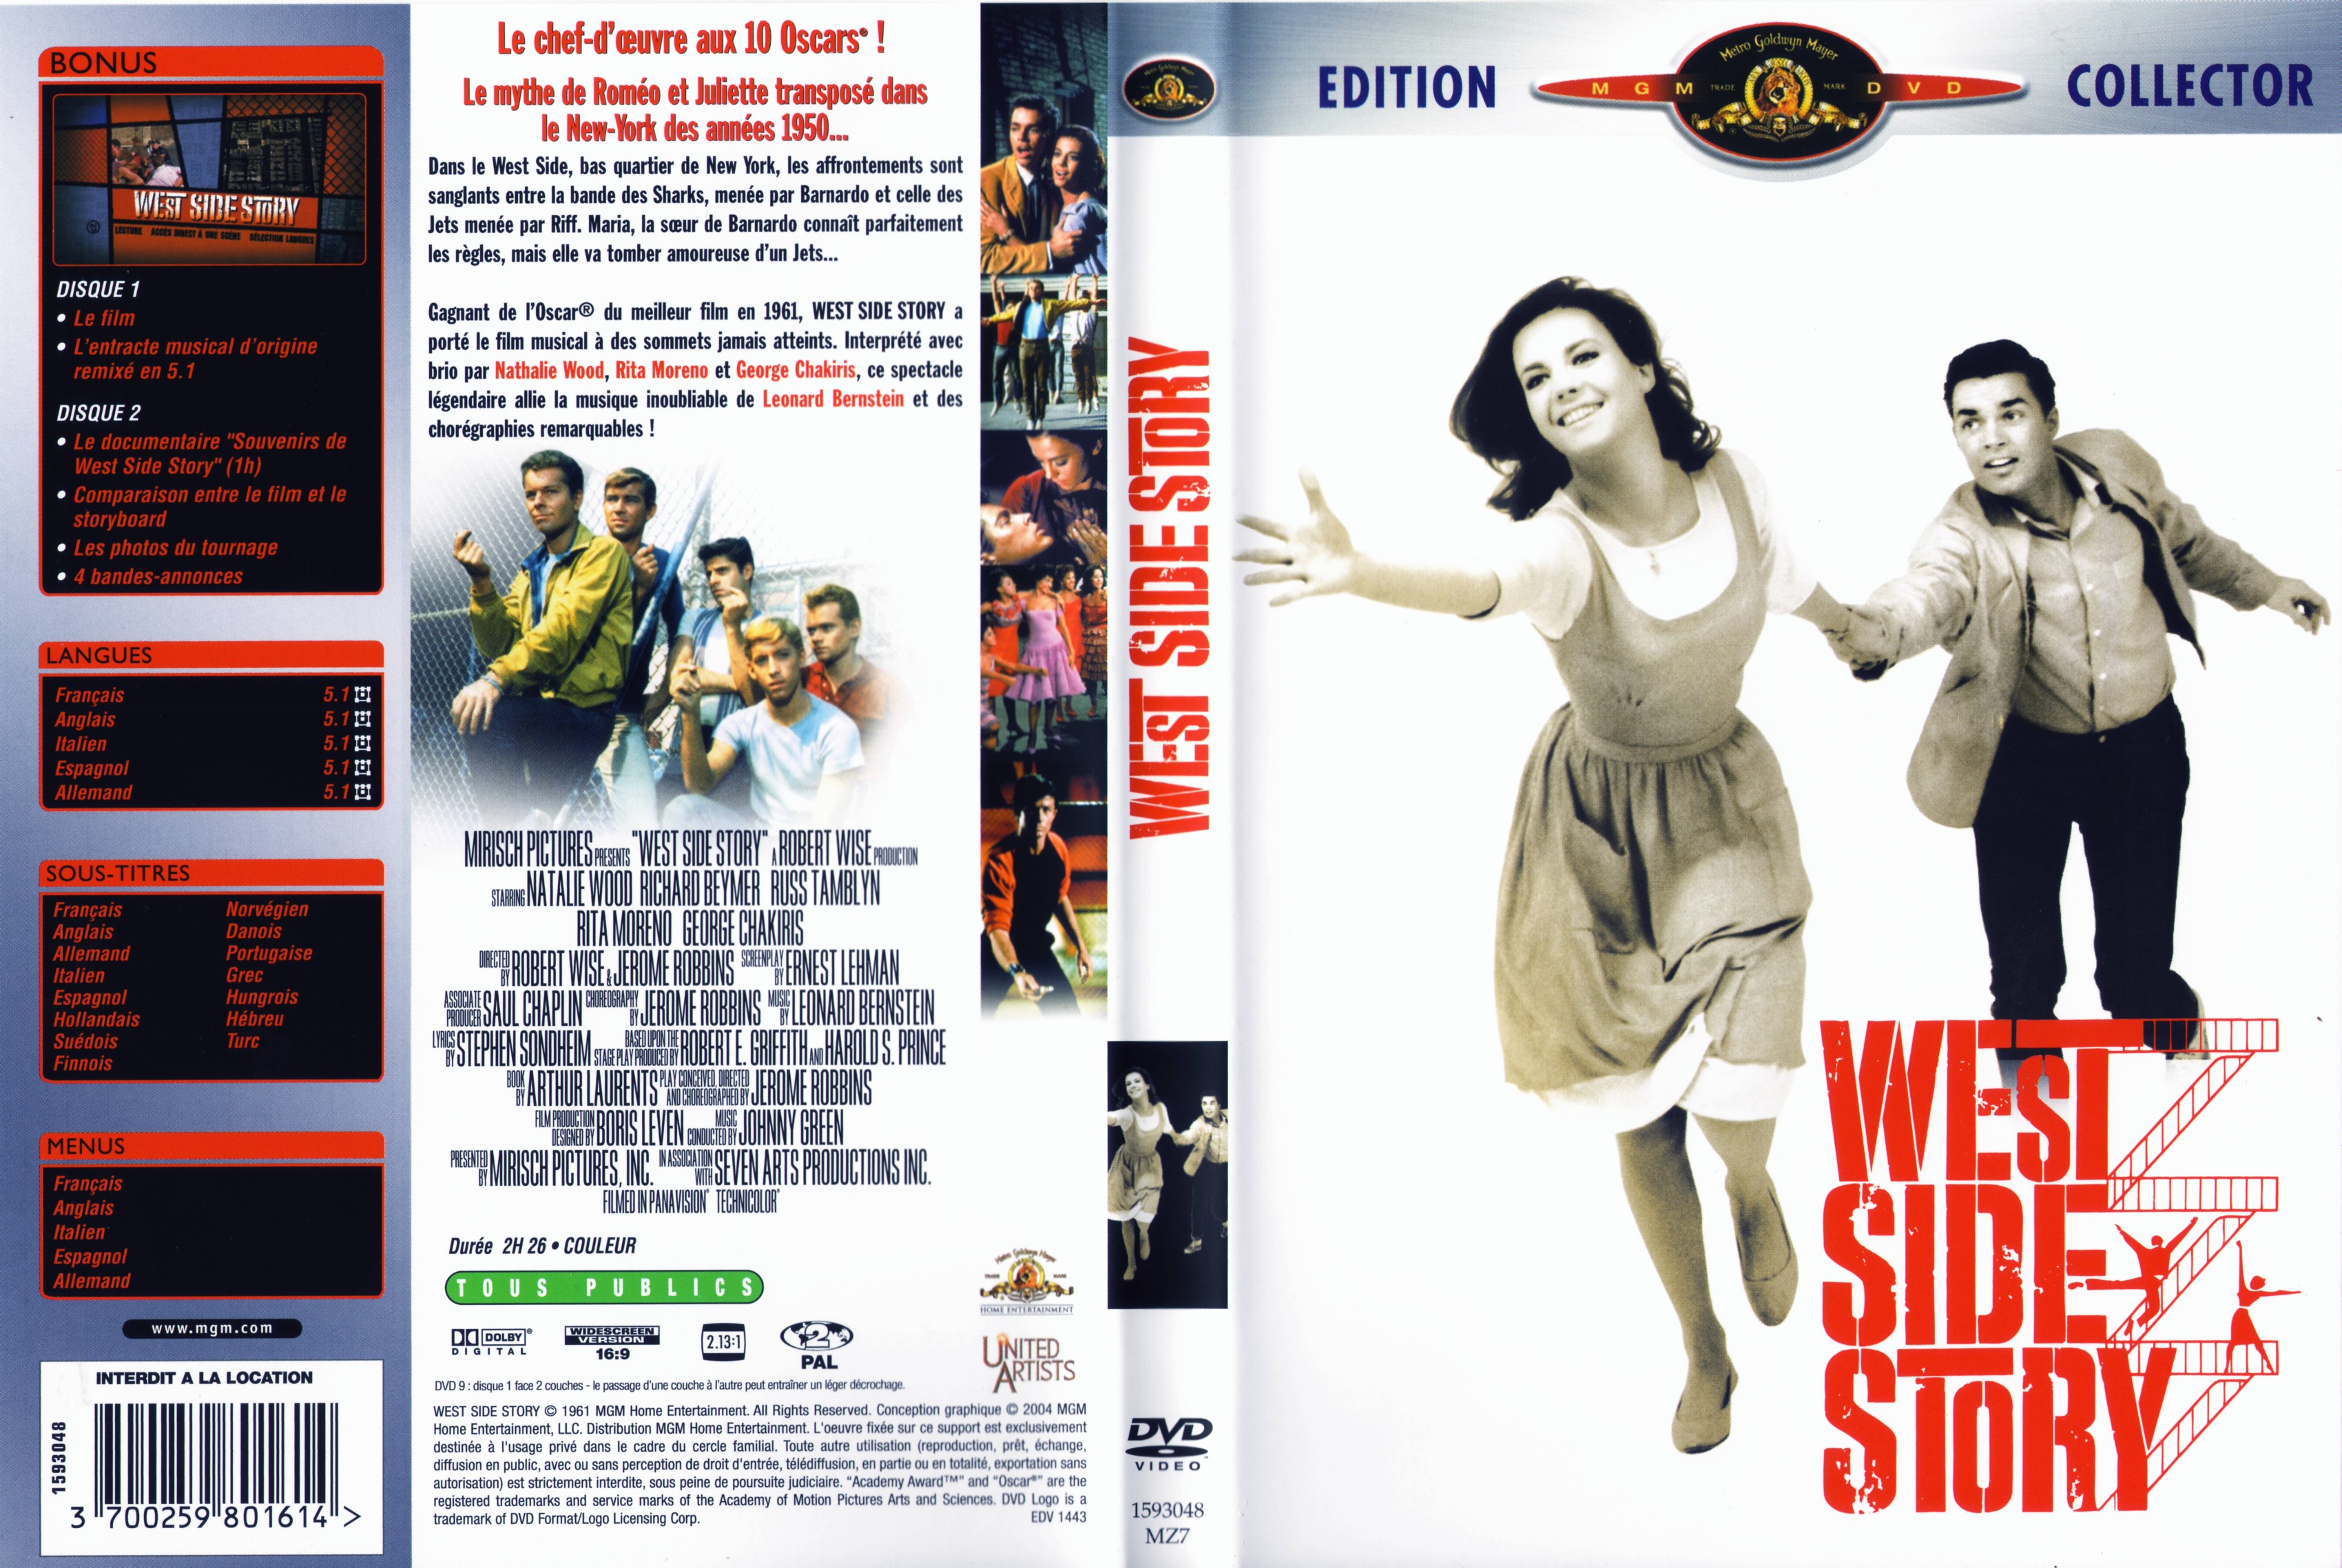 Jaquette DVD West side story